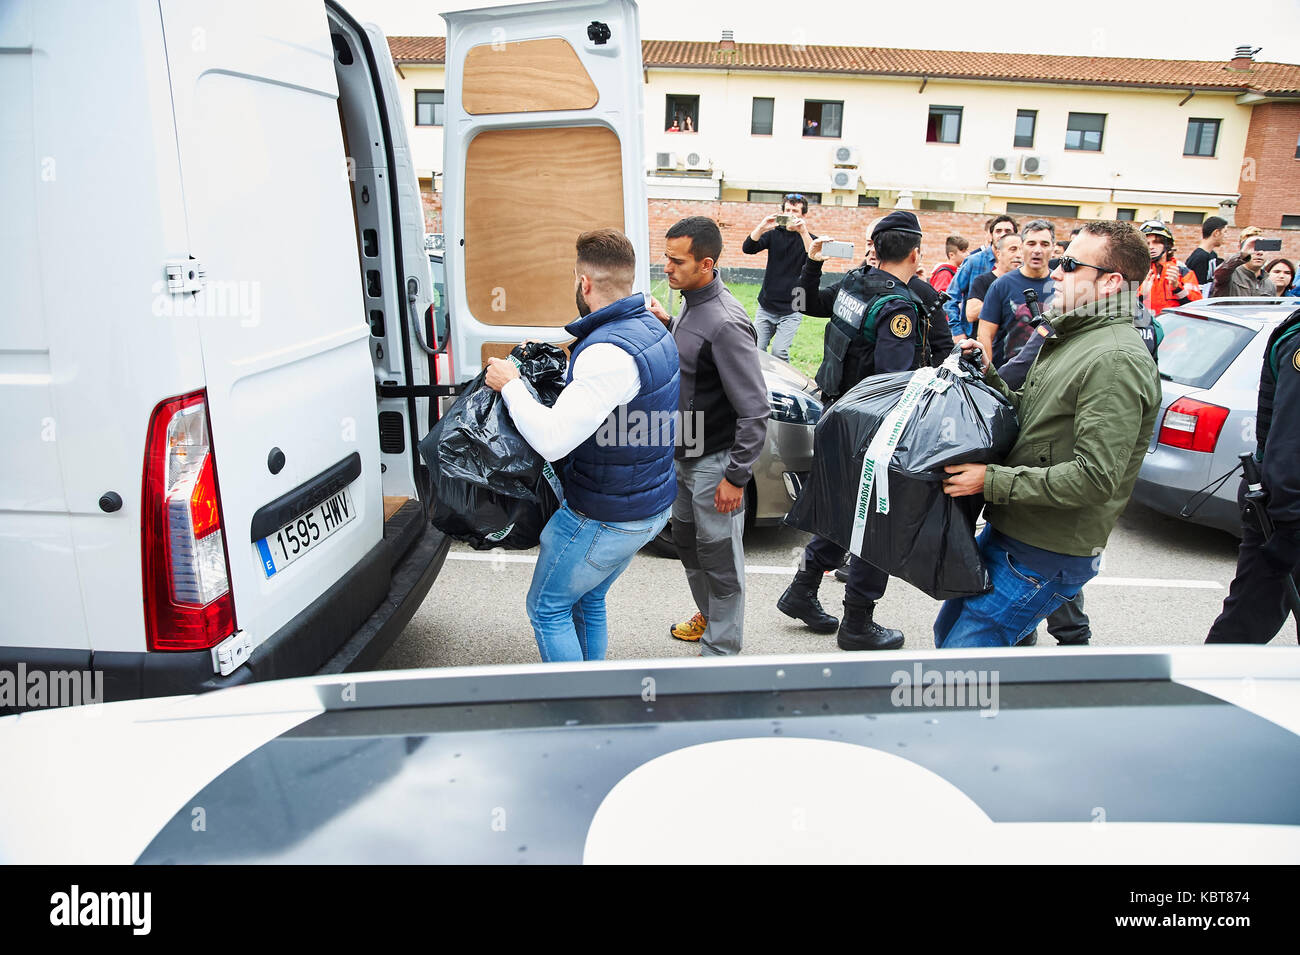 Sant Julia de Ramis, Girona, Spain. 1 October 2017. Spanish Guardia Civil seize ballot boxes from Sant Julia de Ramis. The referendum has been deemed illegal by the Spanish government in Madrid Credit: Pablo Guillen/Alamy Live News Stock Photo